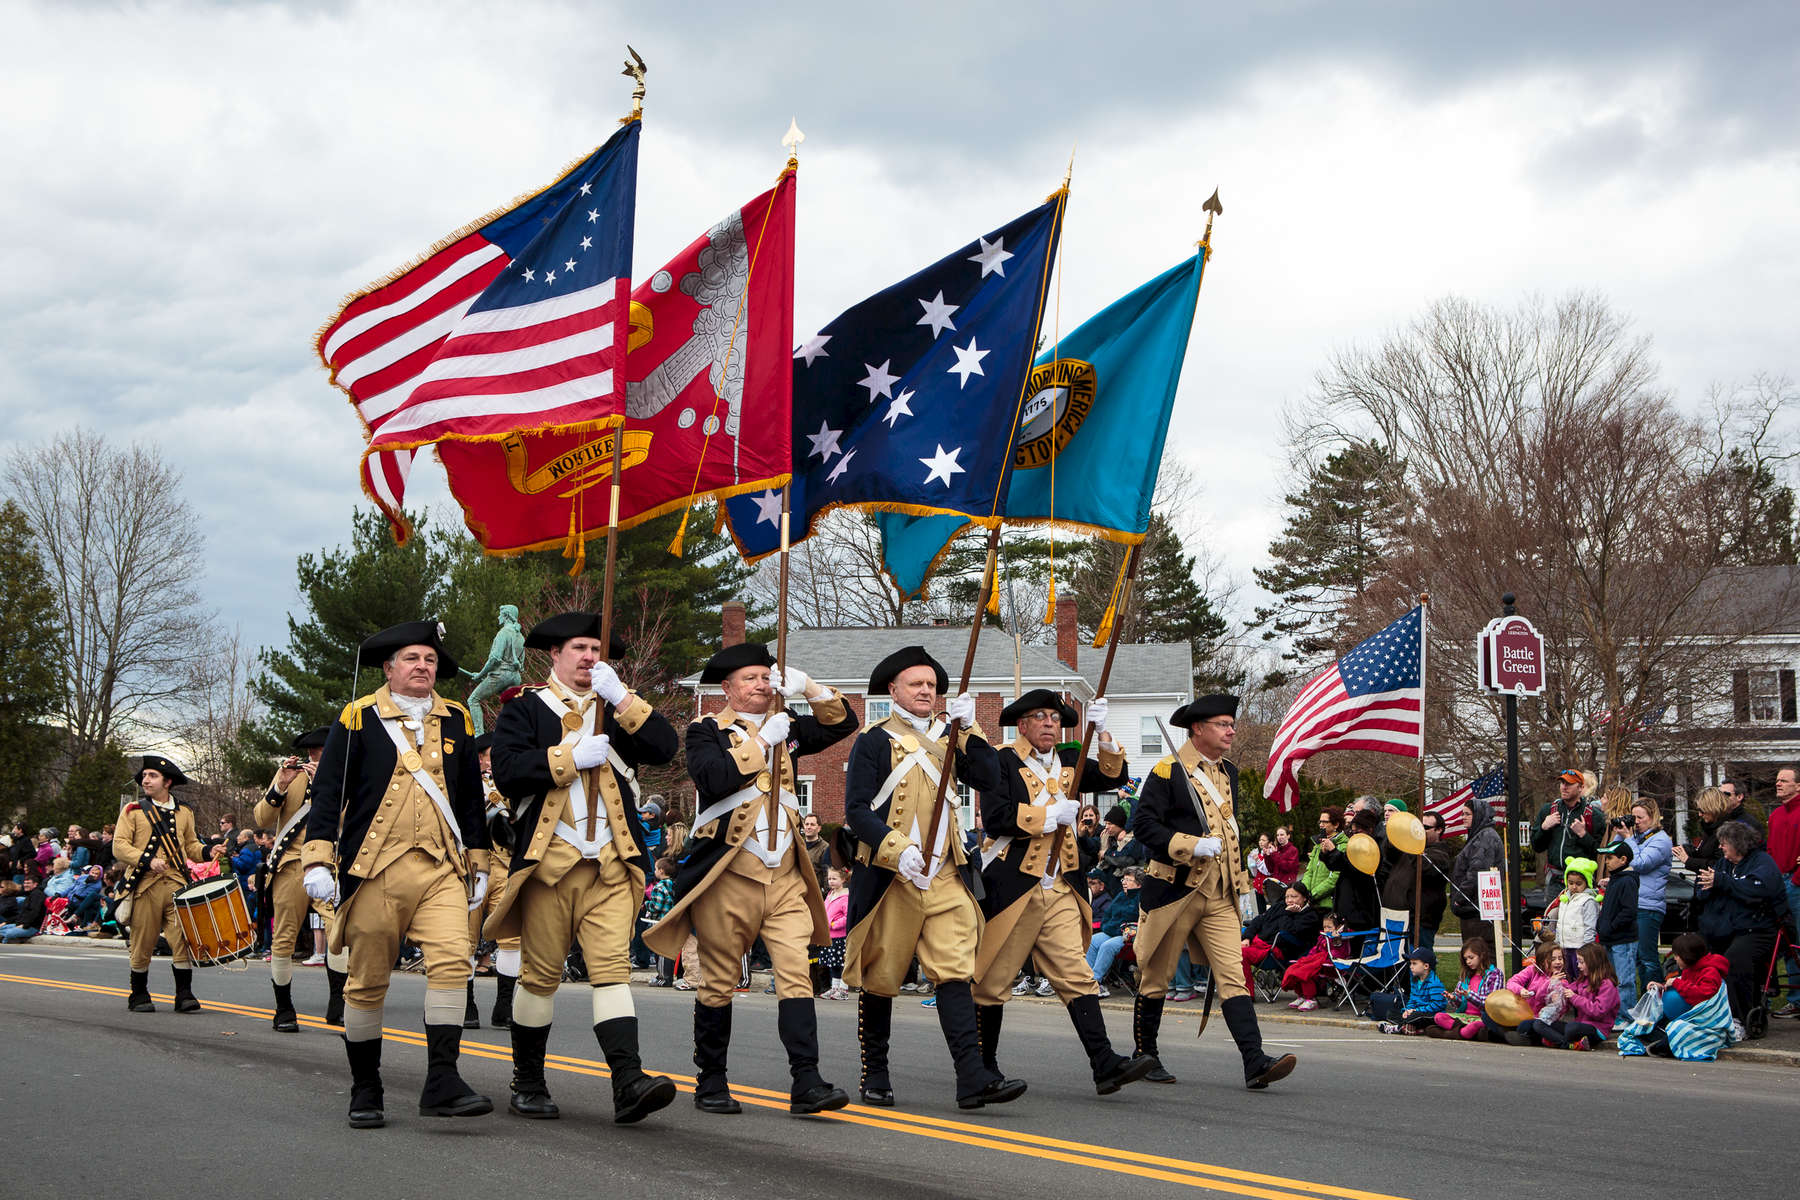 Lexington, MA., April 14, 2013: The town of Lexington celebrates its 300th anniversary with its annual Patriots Day parade. This year also marks the 238th anniversary of the Battle of Lexington on the village green. Photograph by Evan McGlinn for The New York Times